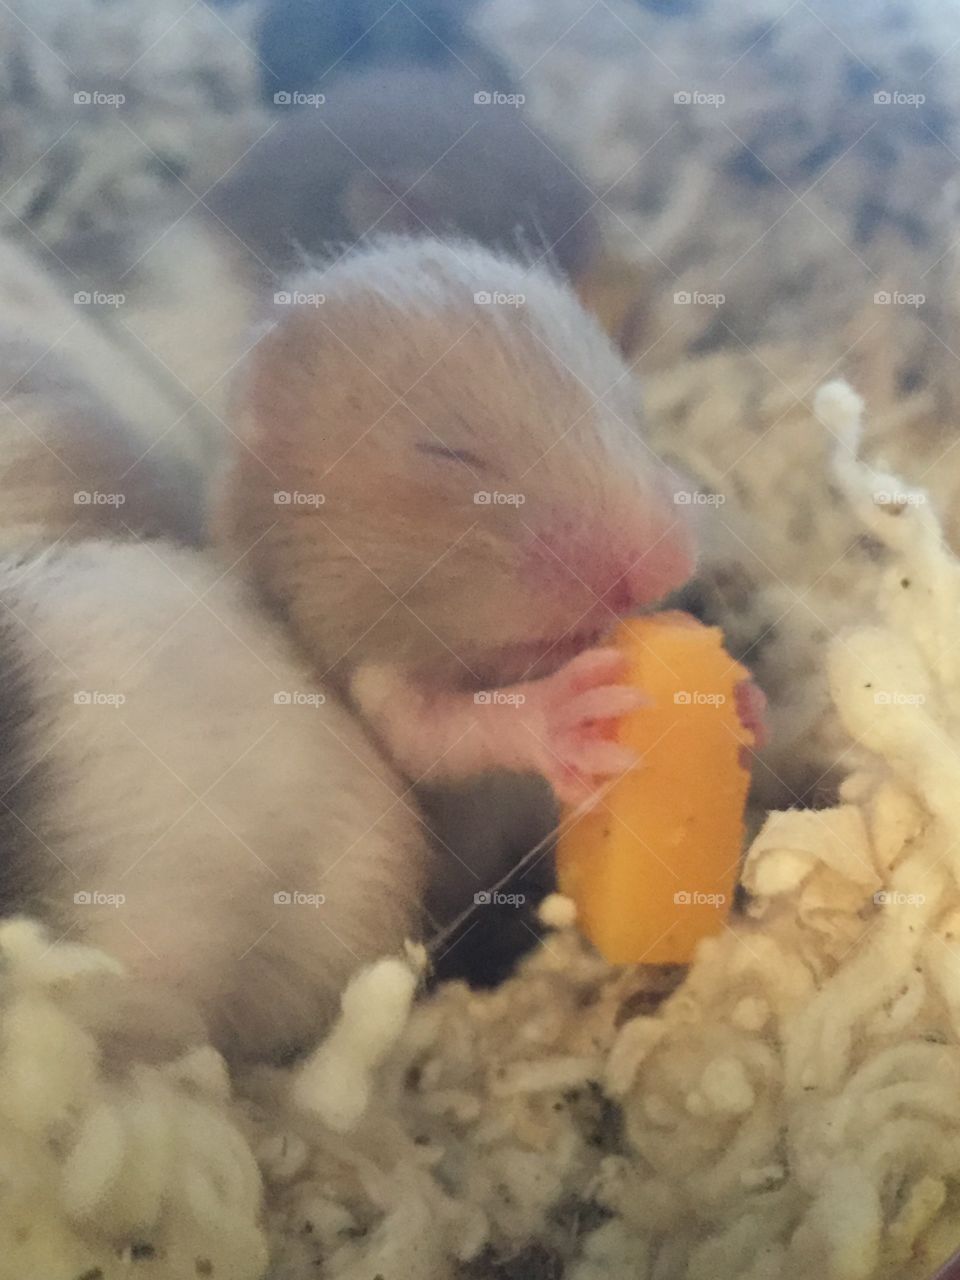 A tiny baby hamster holding some cheese. 